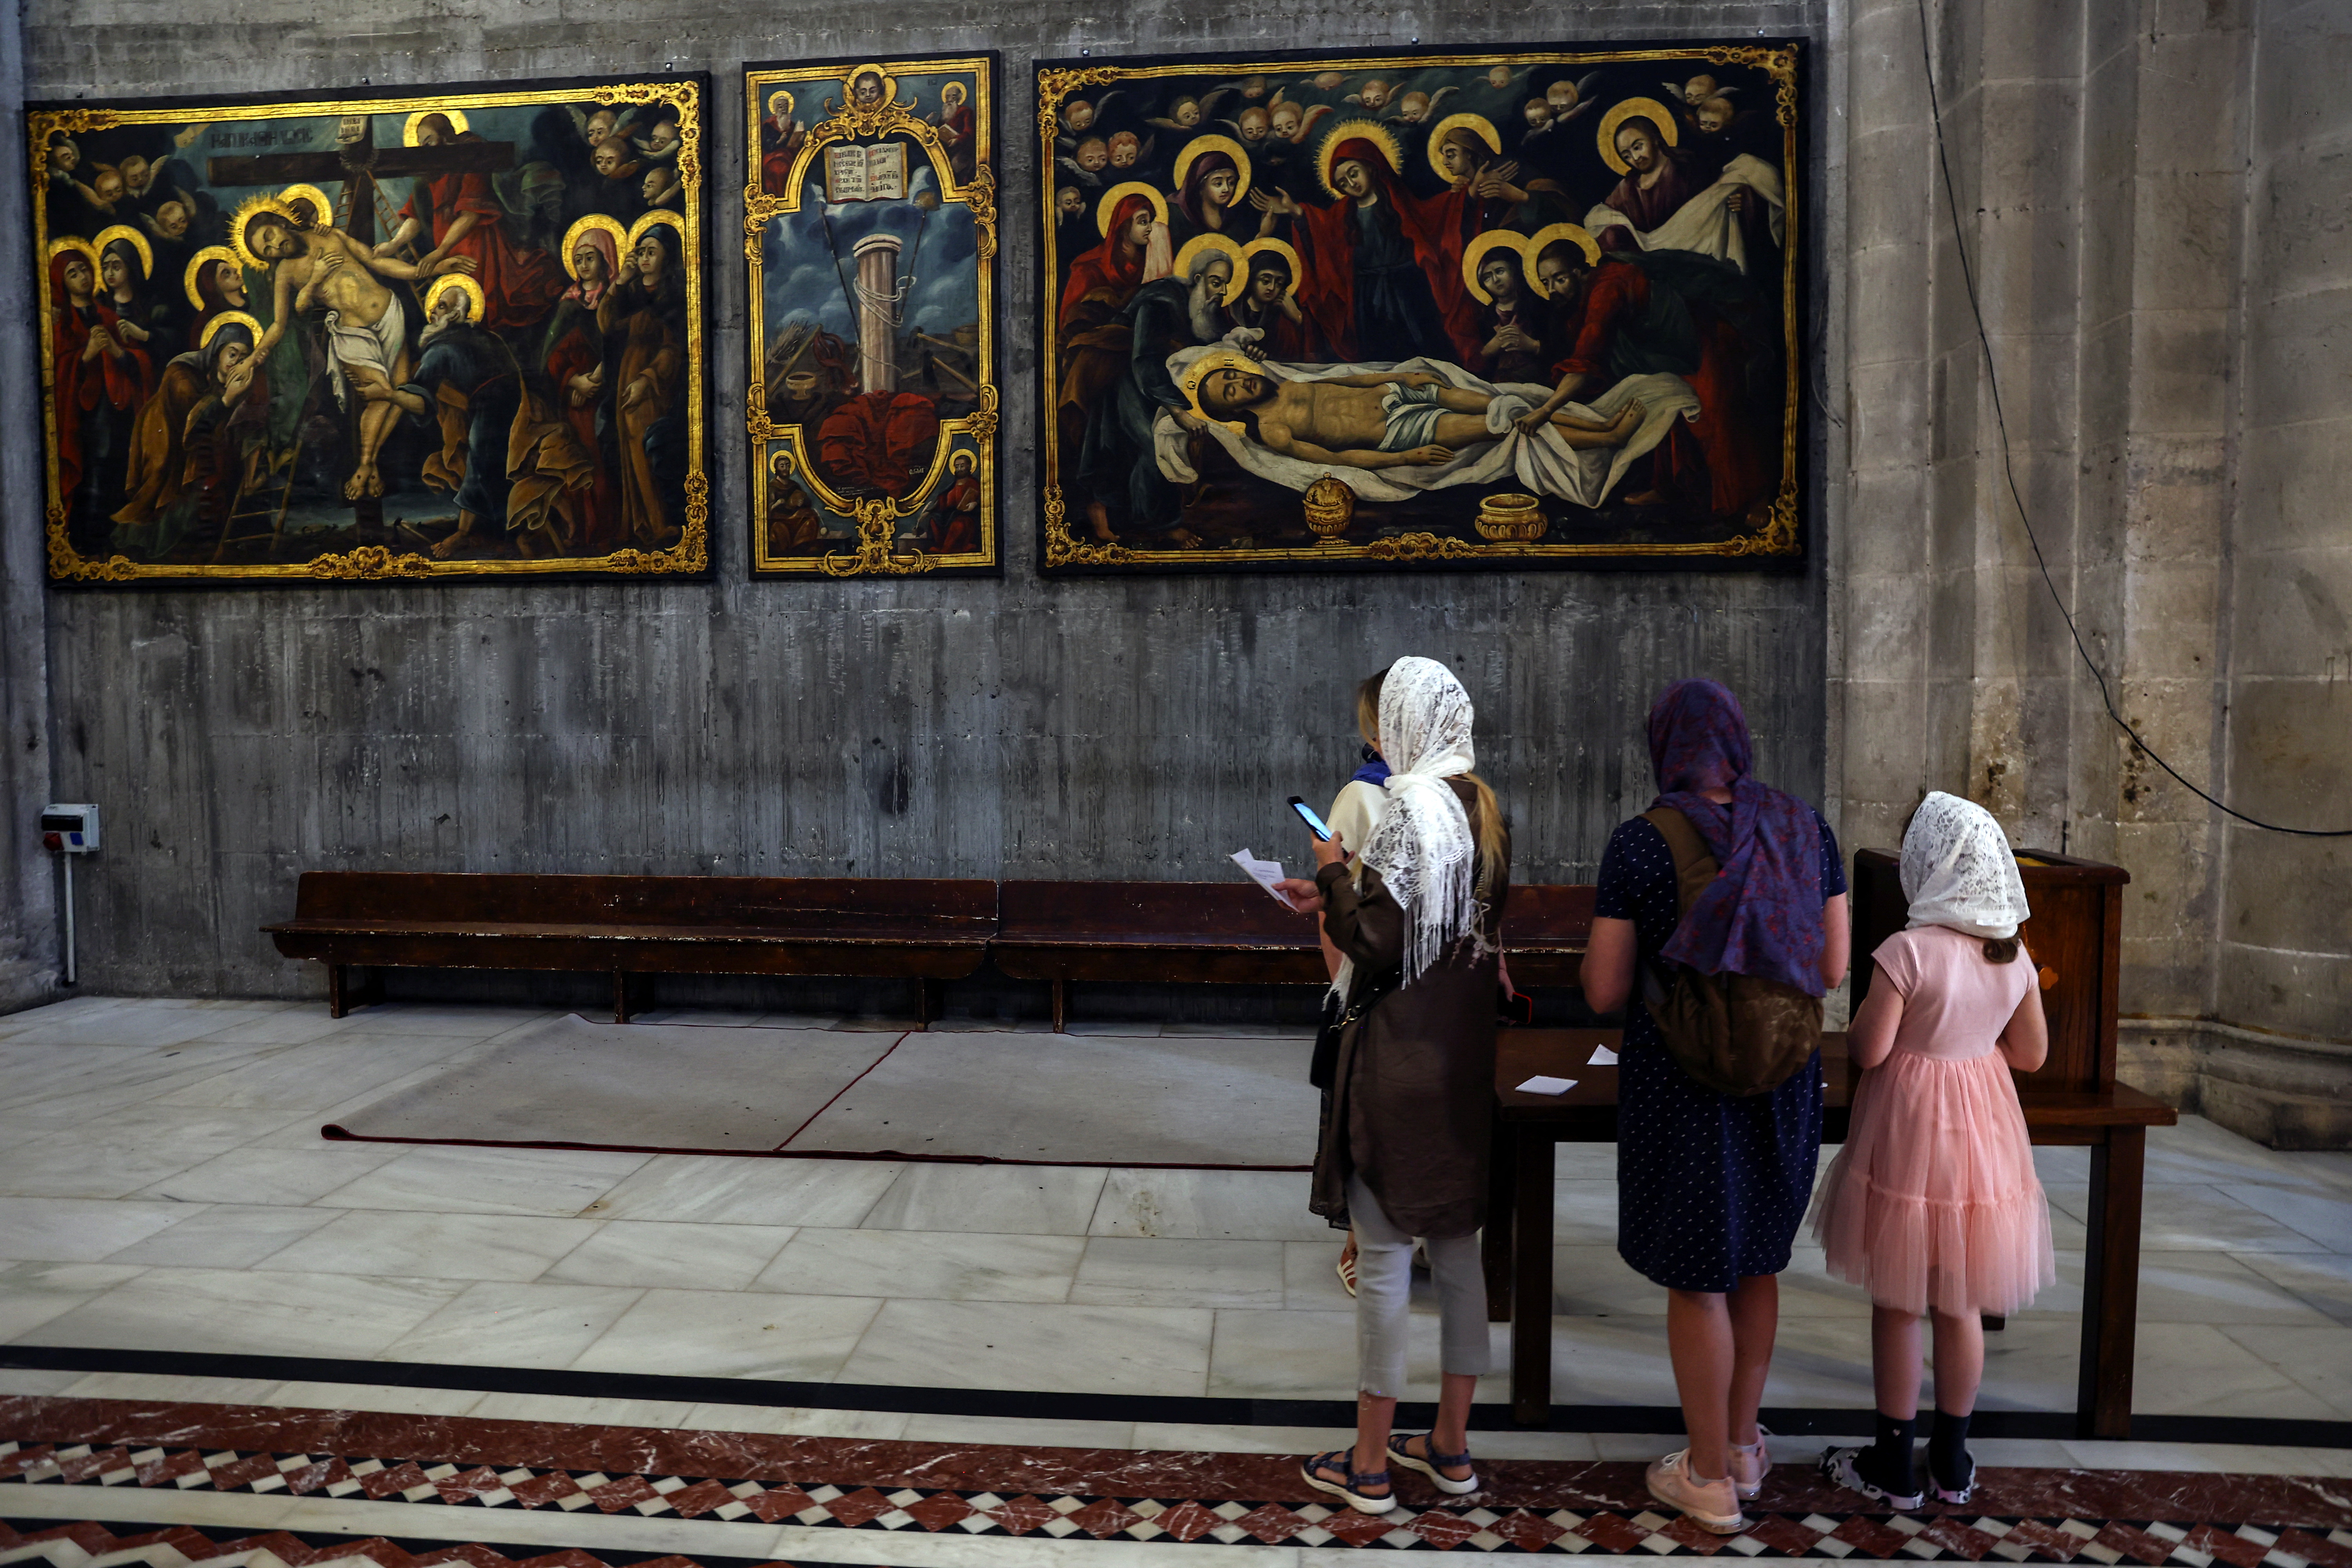 People view paintings during a visit to the Church of the Holy Sepulchre, in Jerusalem's Old City